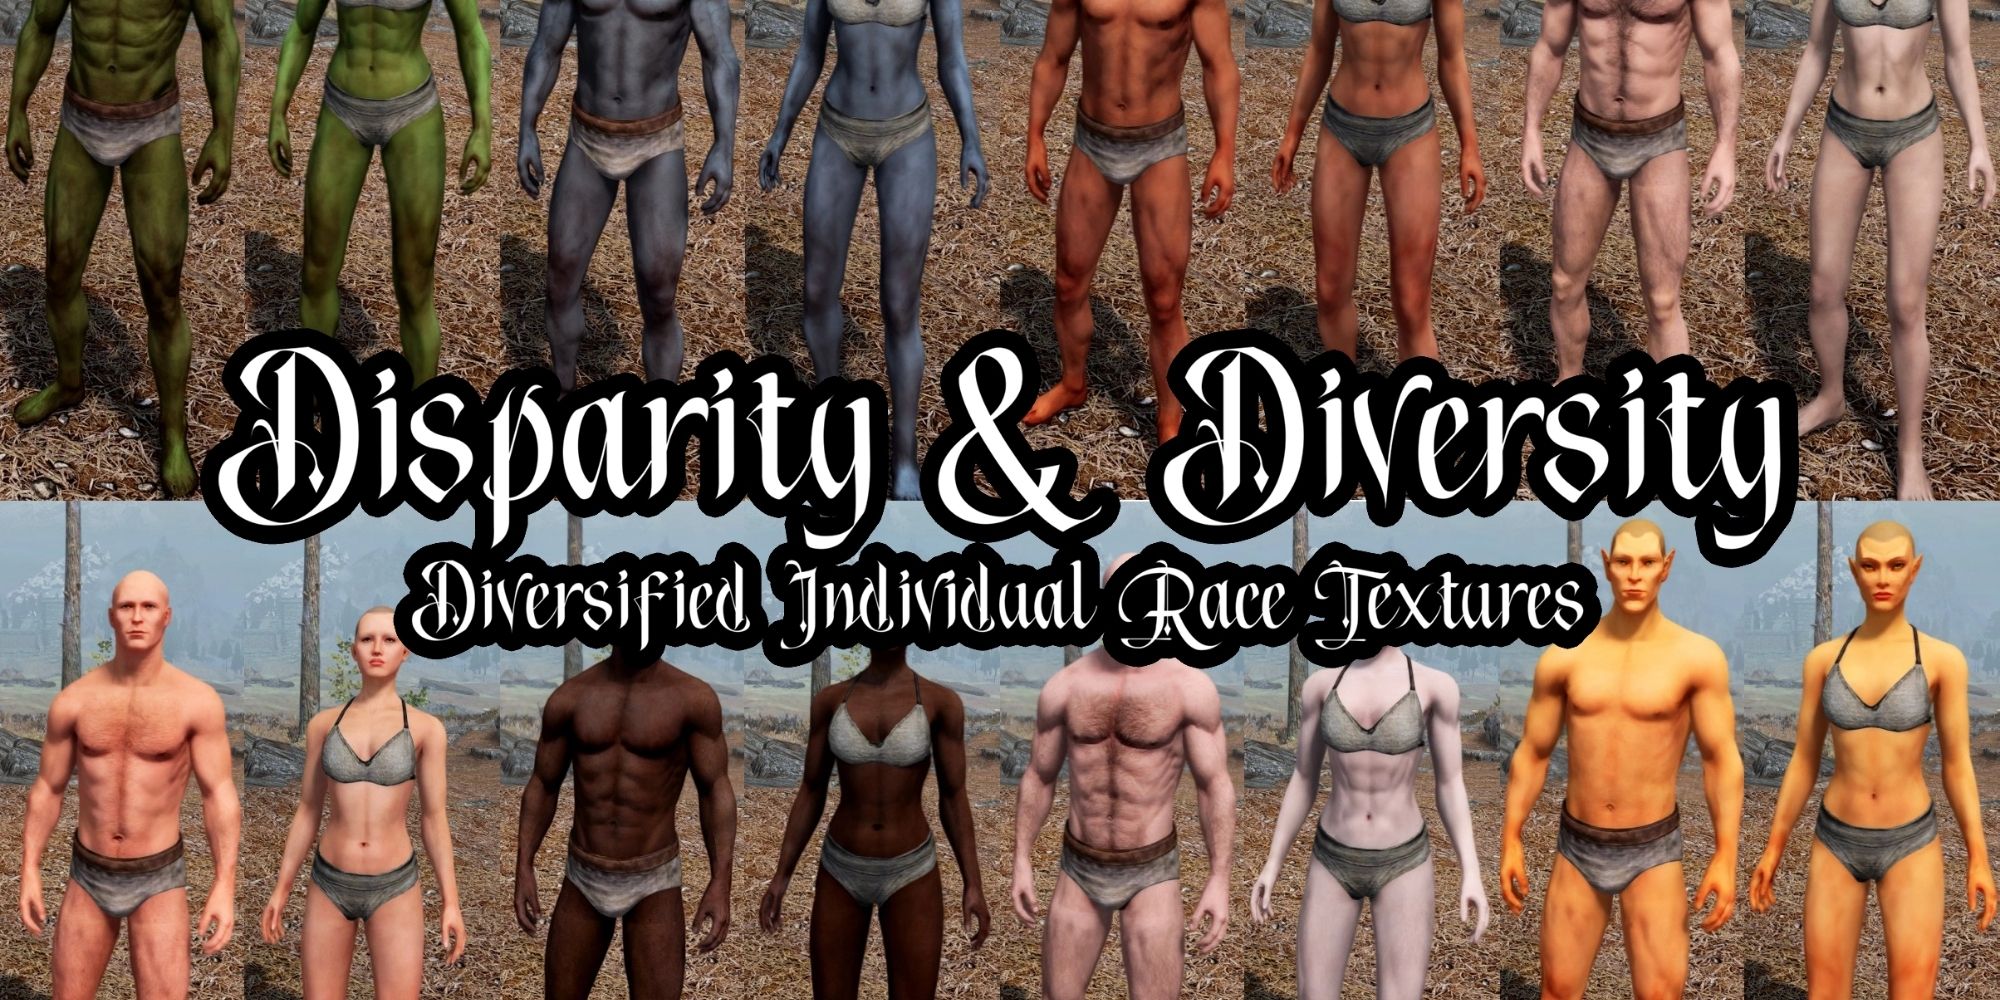 Promotional image for the Disparity & Diversity mod for Skyrim